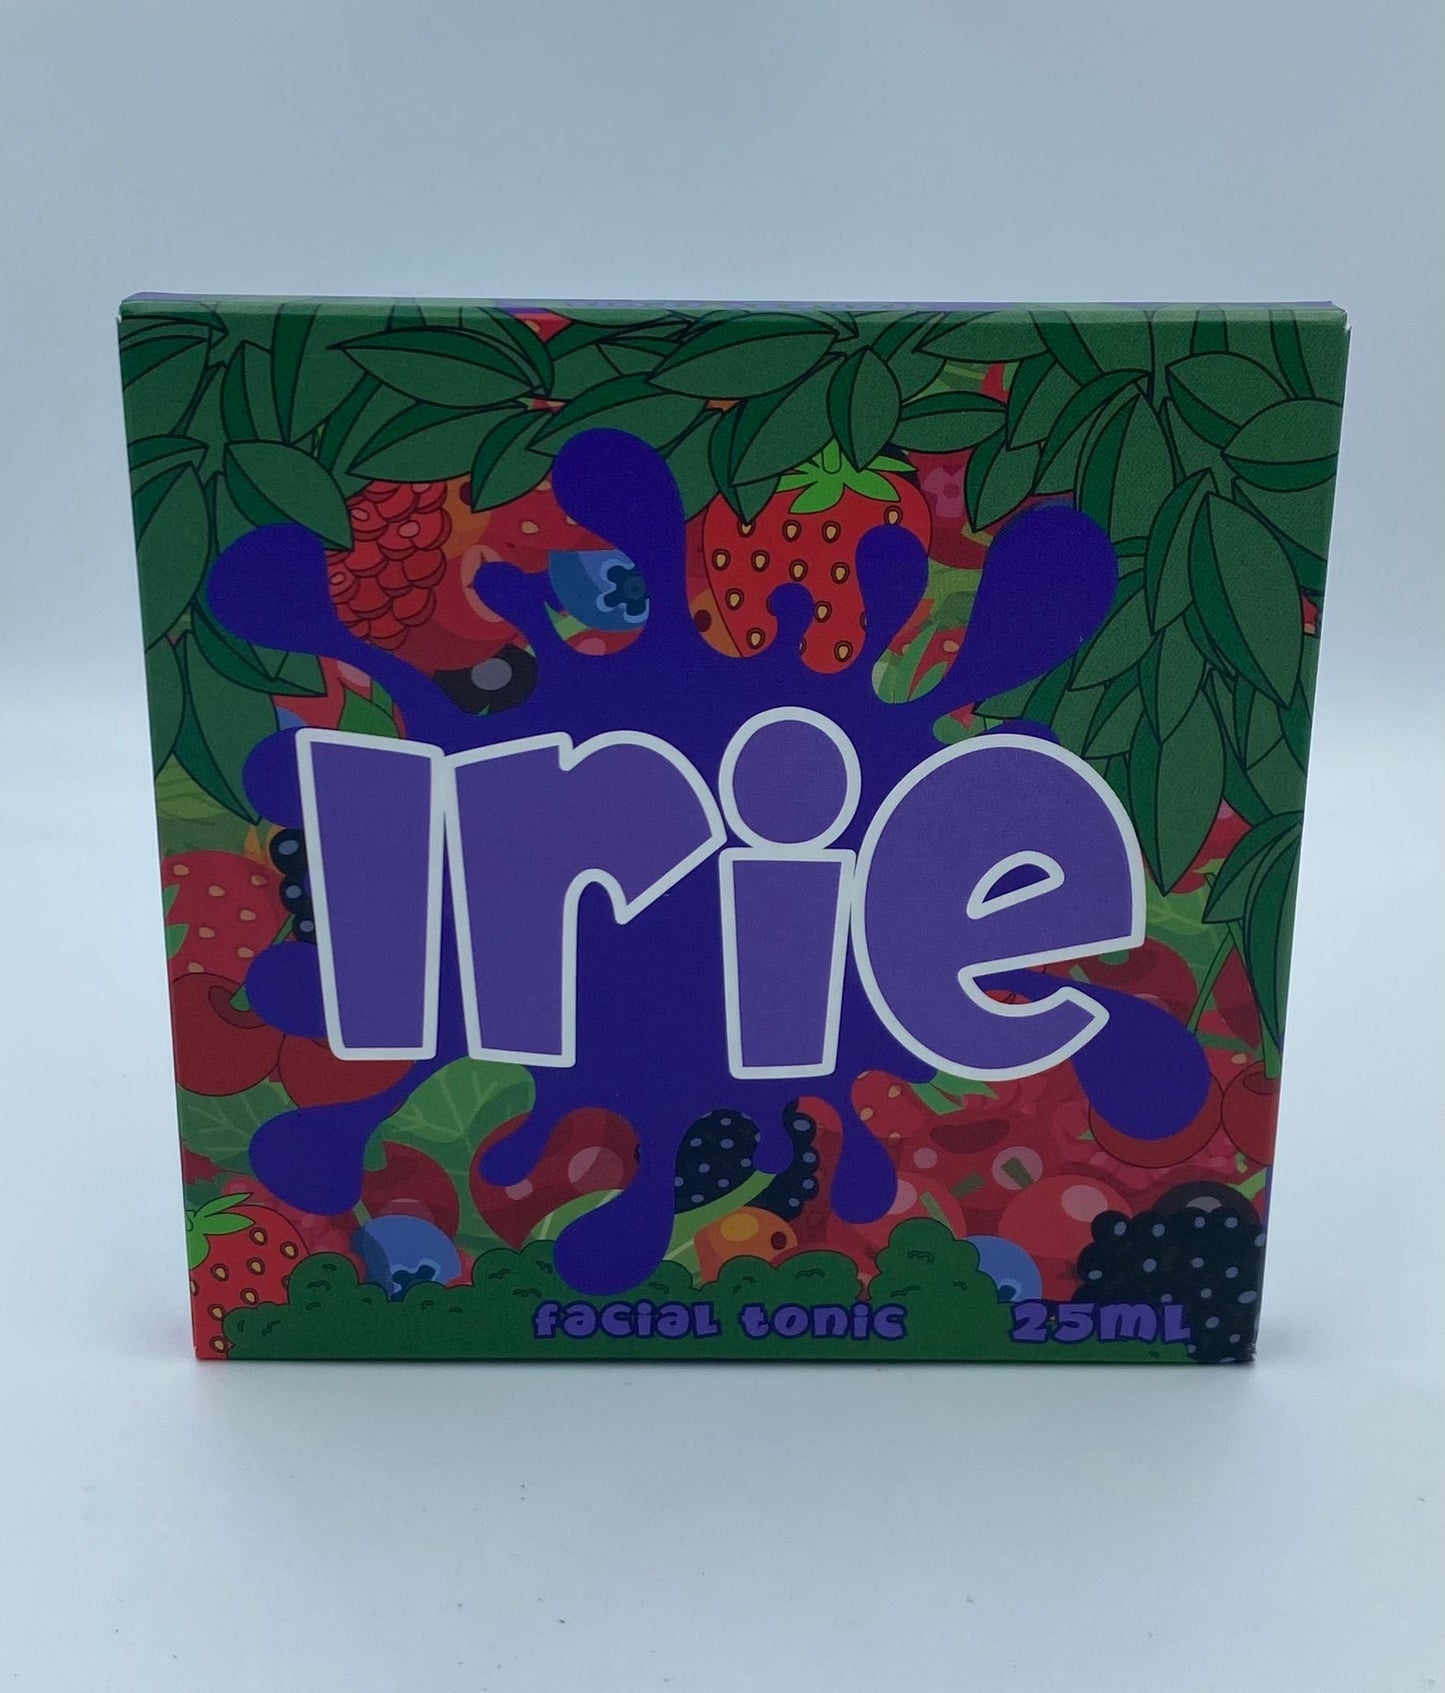 Irie Water forest fruit 25 ml